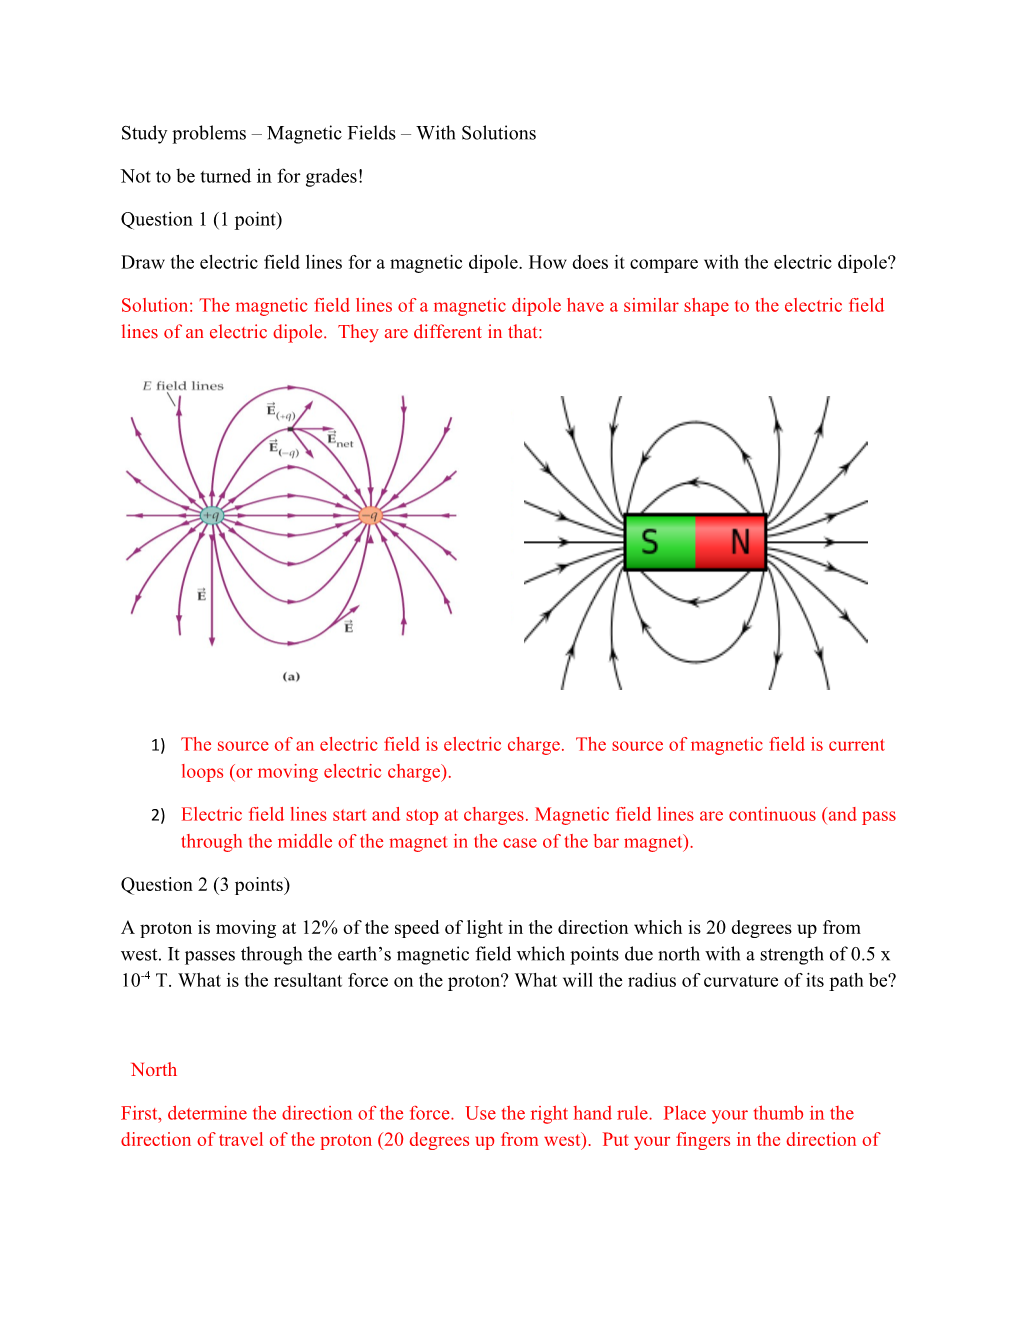 Study Problems Magnetic Fields with Solutions